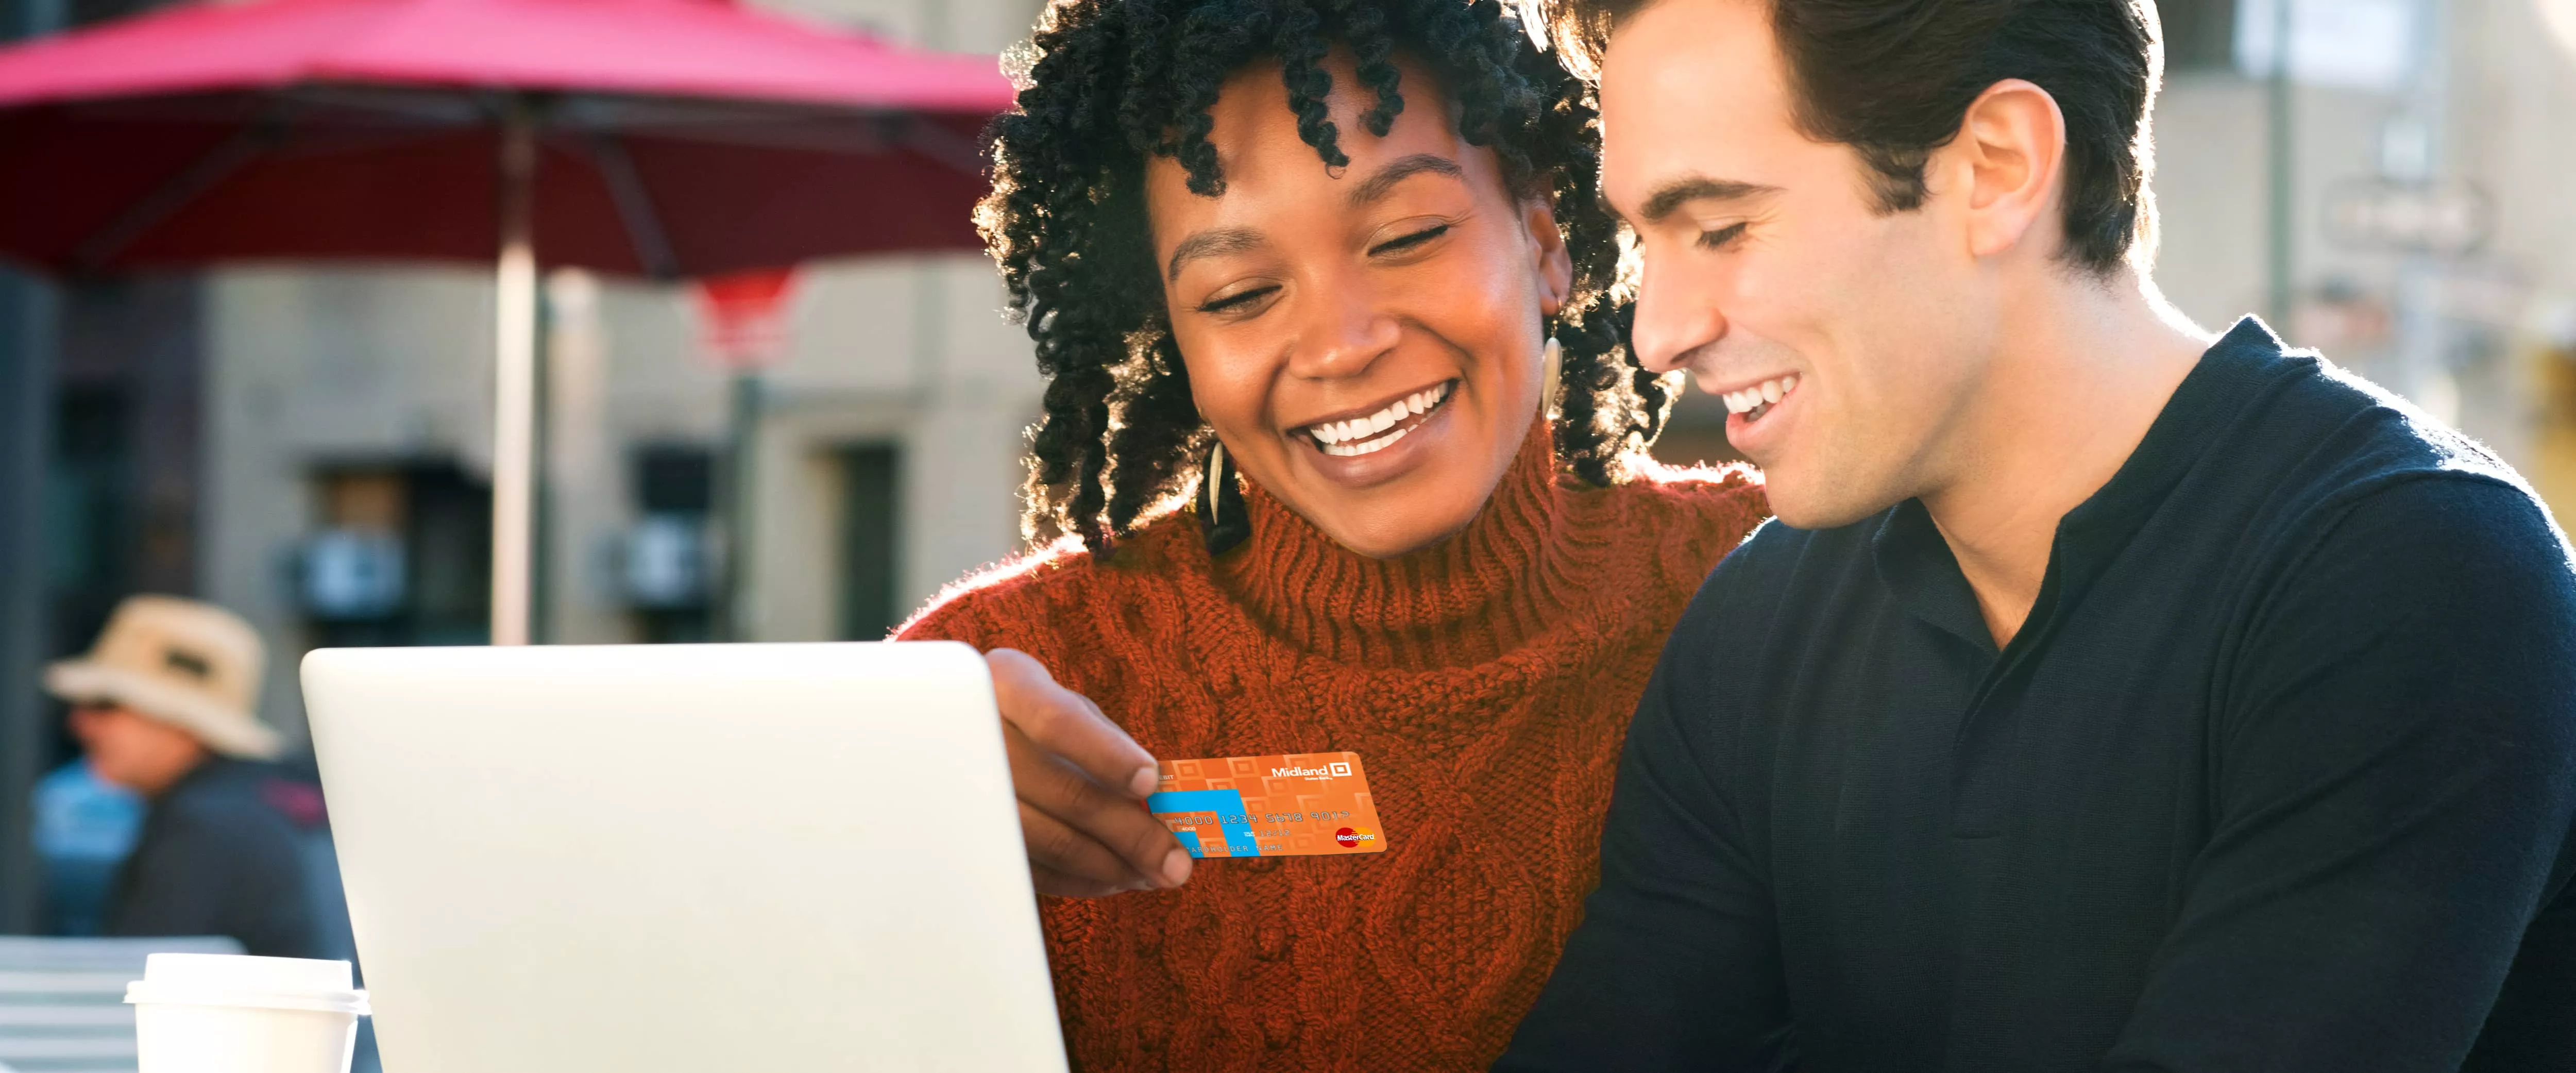 Smiling couple holding a Midland Debit Card while using laptop